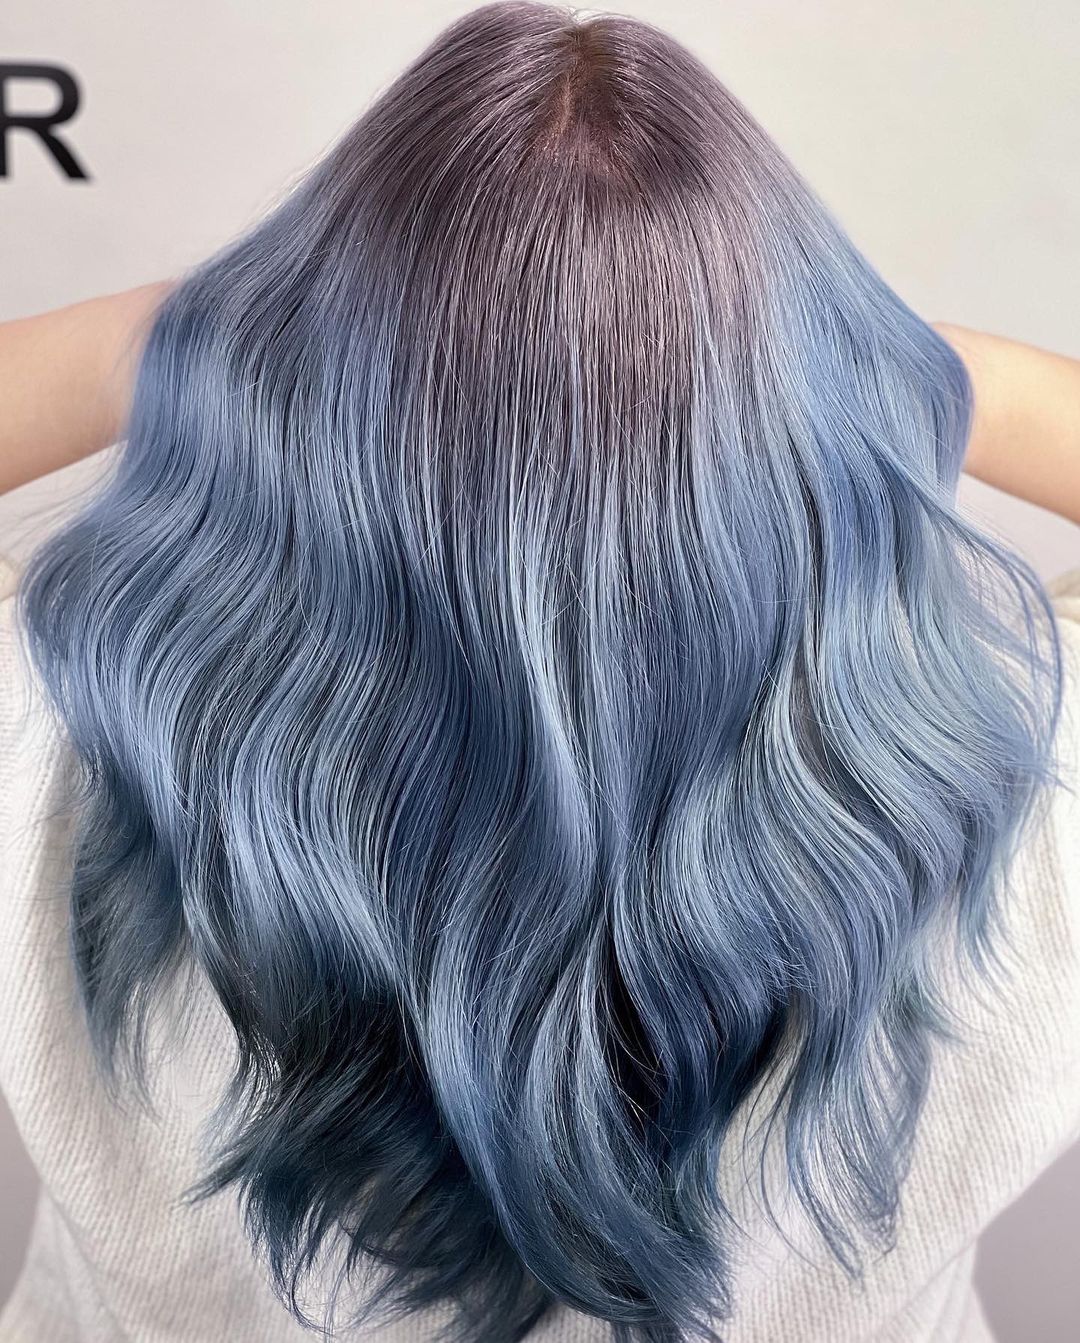 Shoulder Length Hair with Blue Highlights